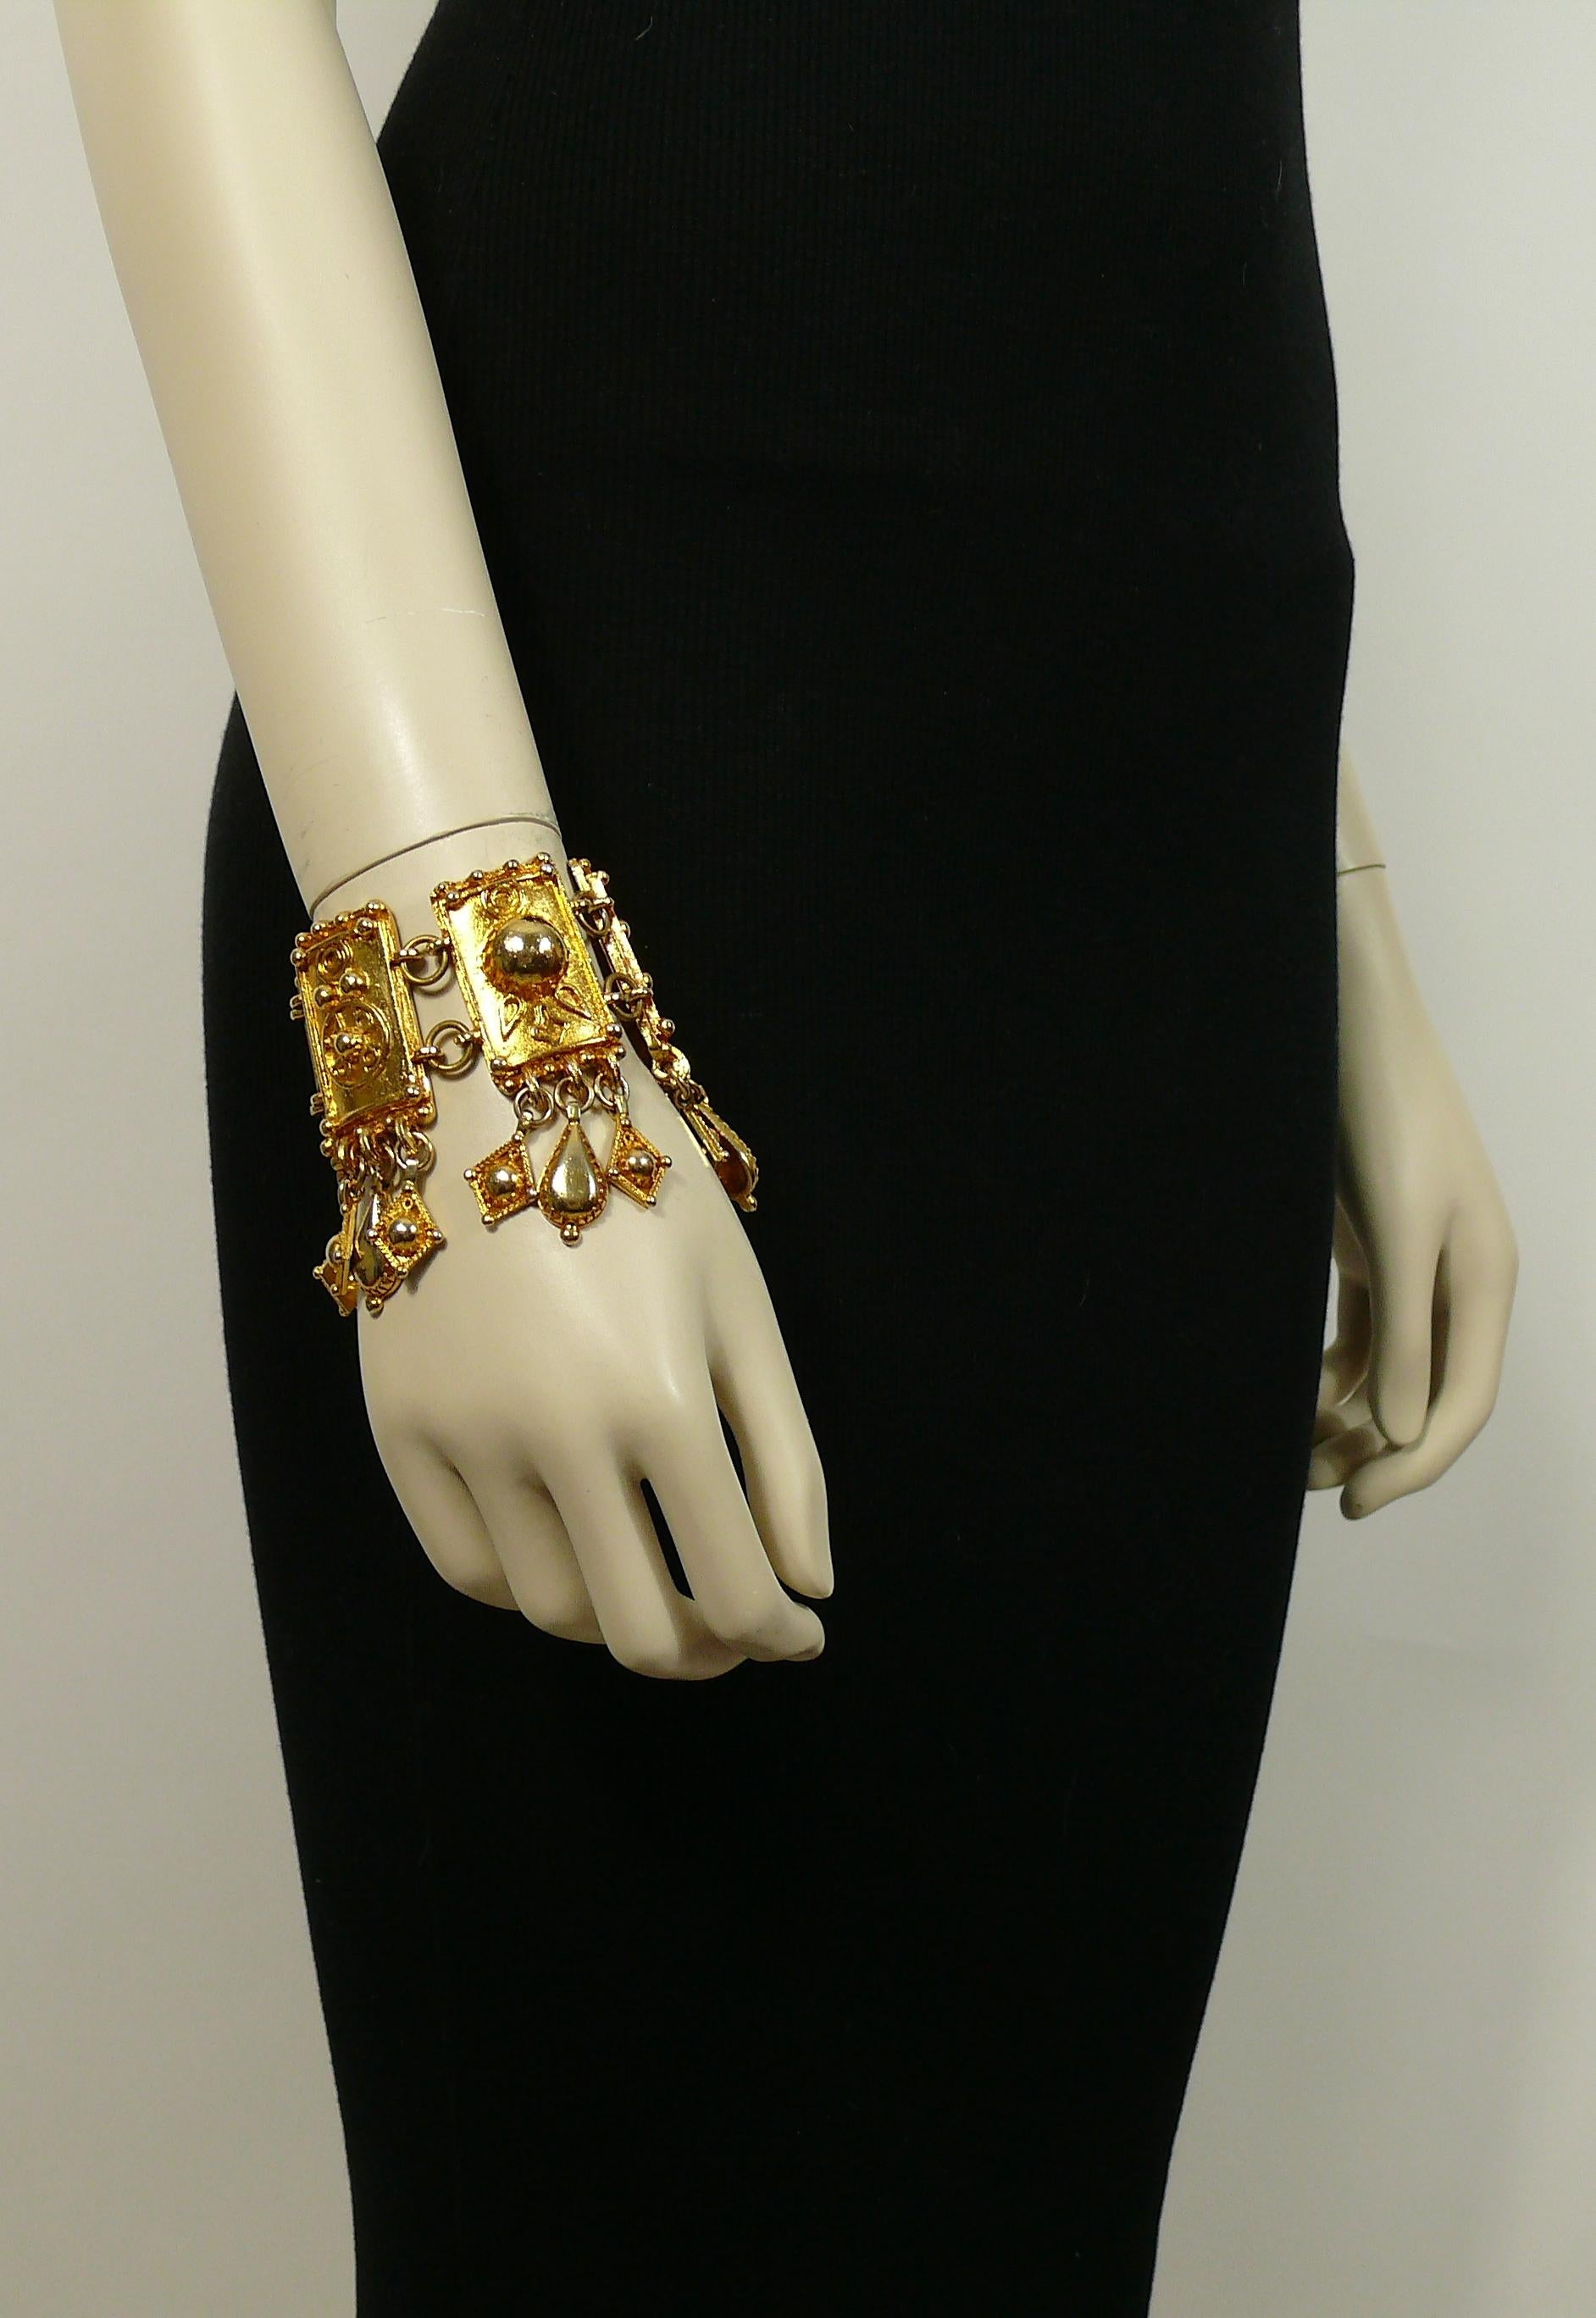 CHRISTIAN LACROIX vintage gold toned Oriental inspired bracelet featuring rectangular shield-like inks with geometric details and charms.

Marked CHRISTIAN LACROIX CL Made in France.

Indicative measurements : length approx. 16.7 cm (6.57 inches) /